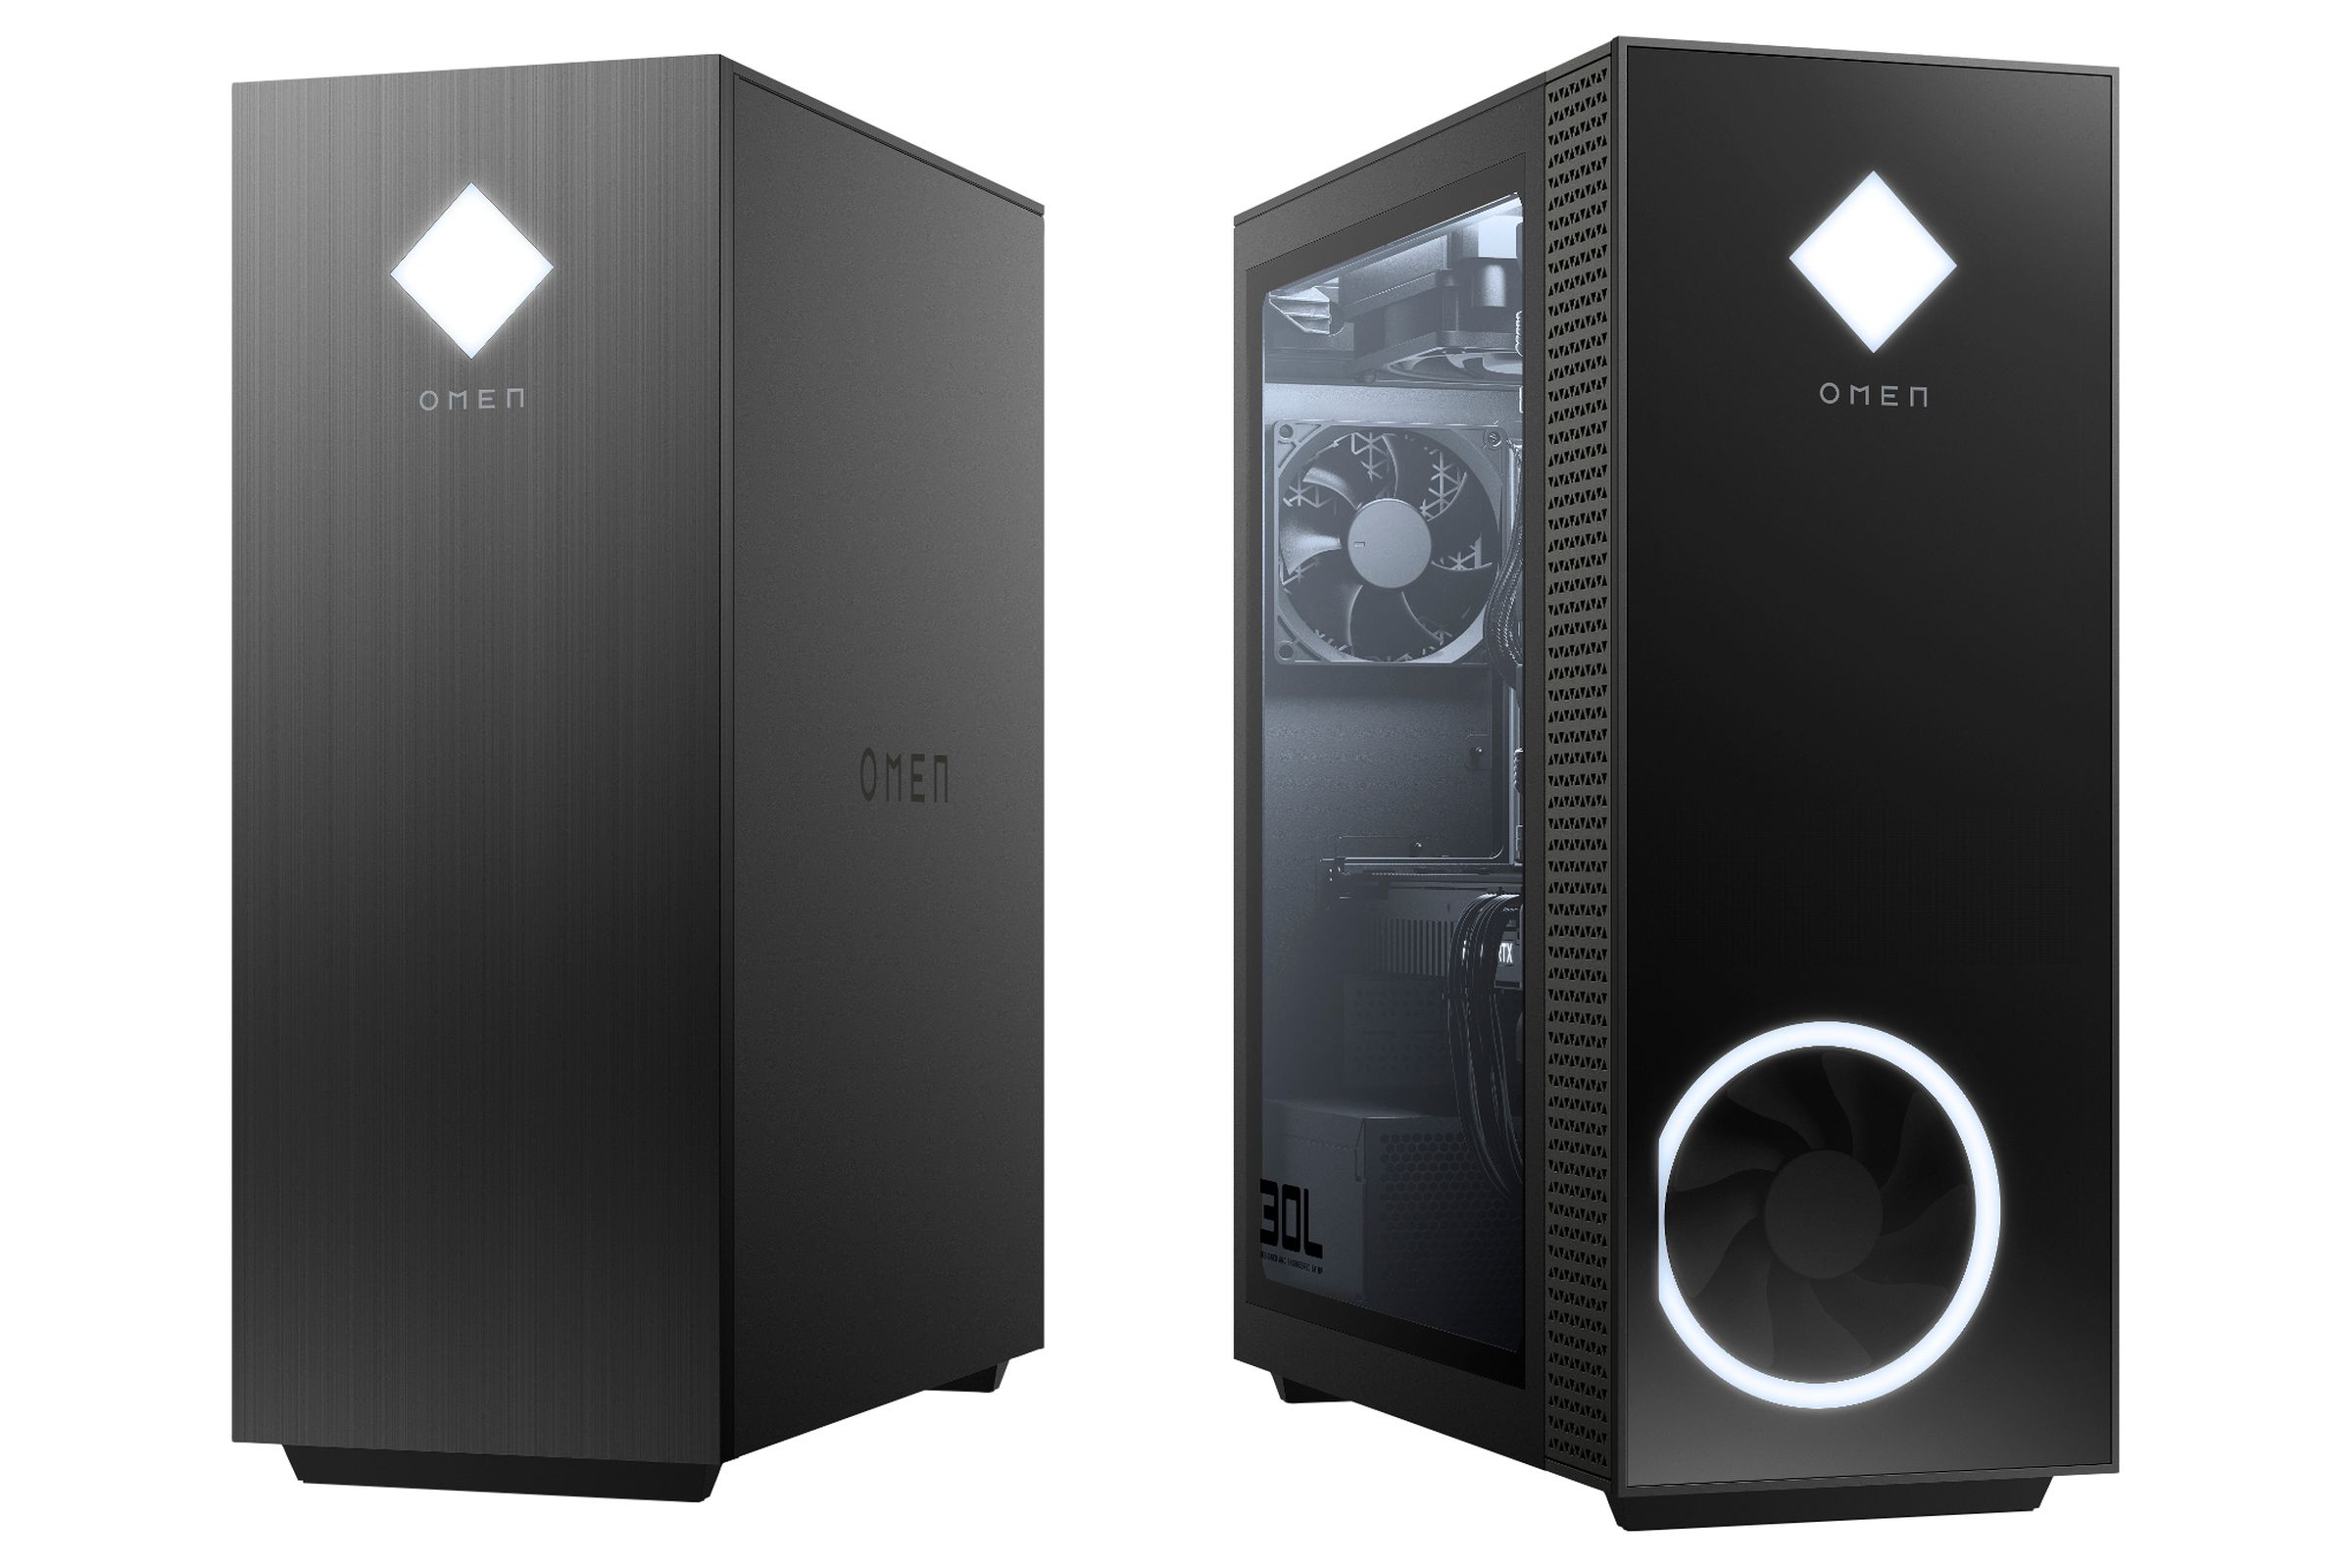 HP’s new Omen 25L (left) and the 30L